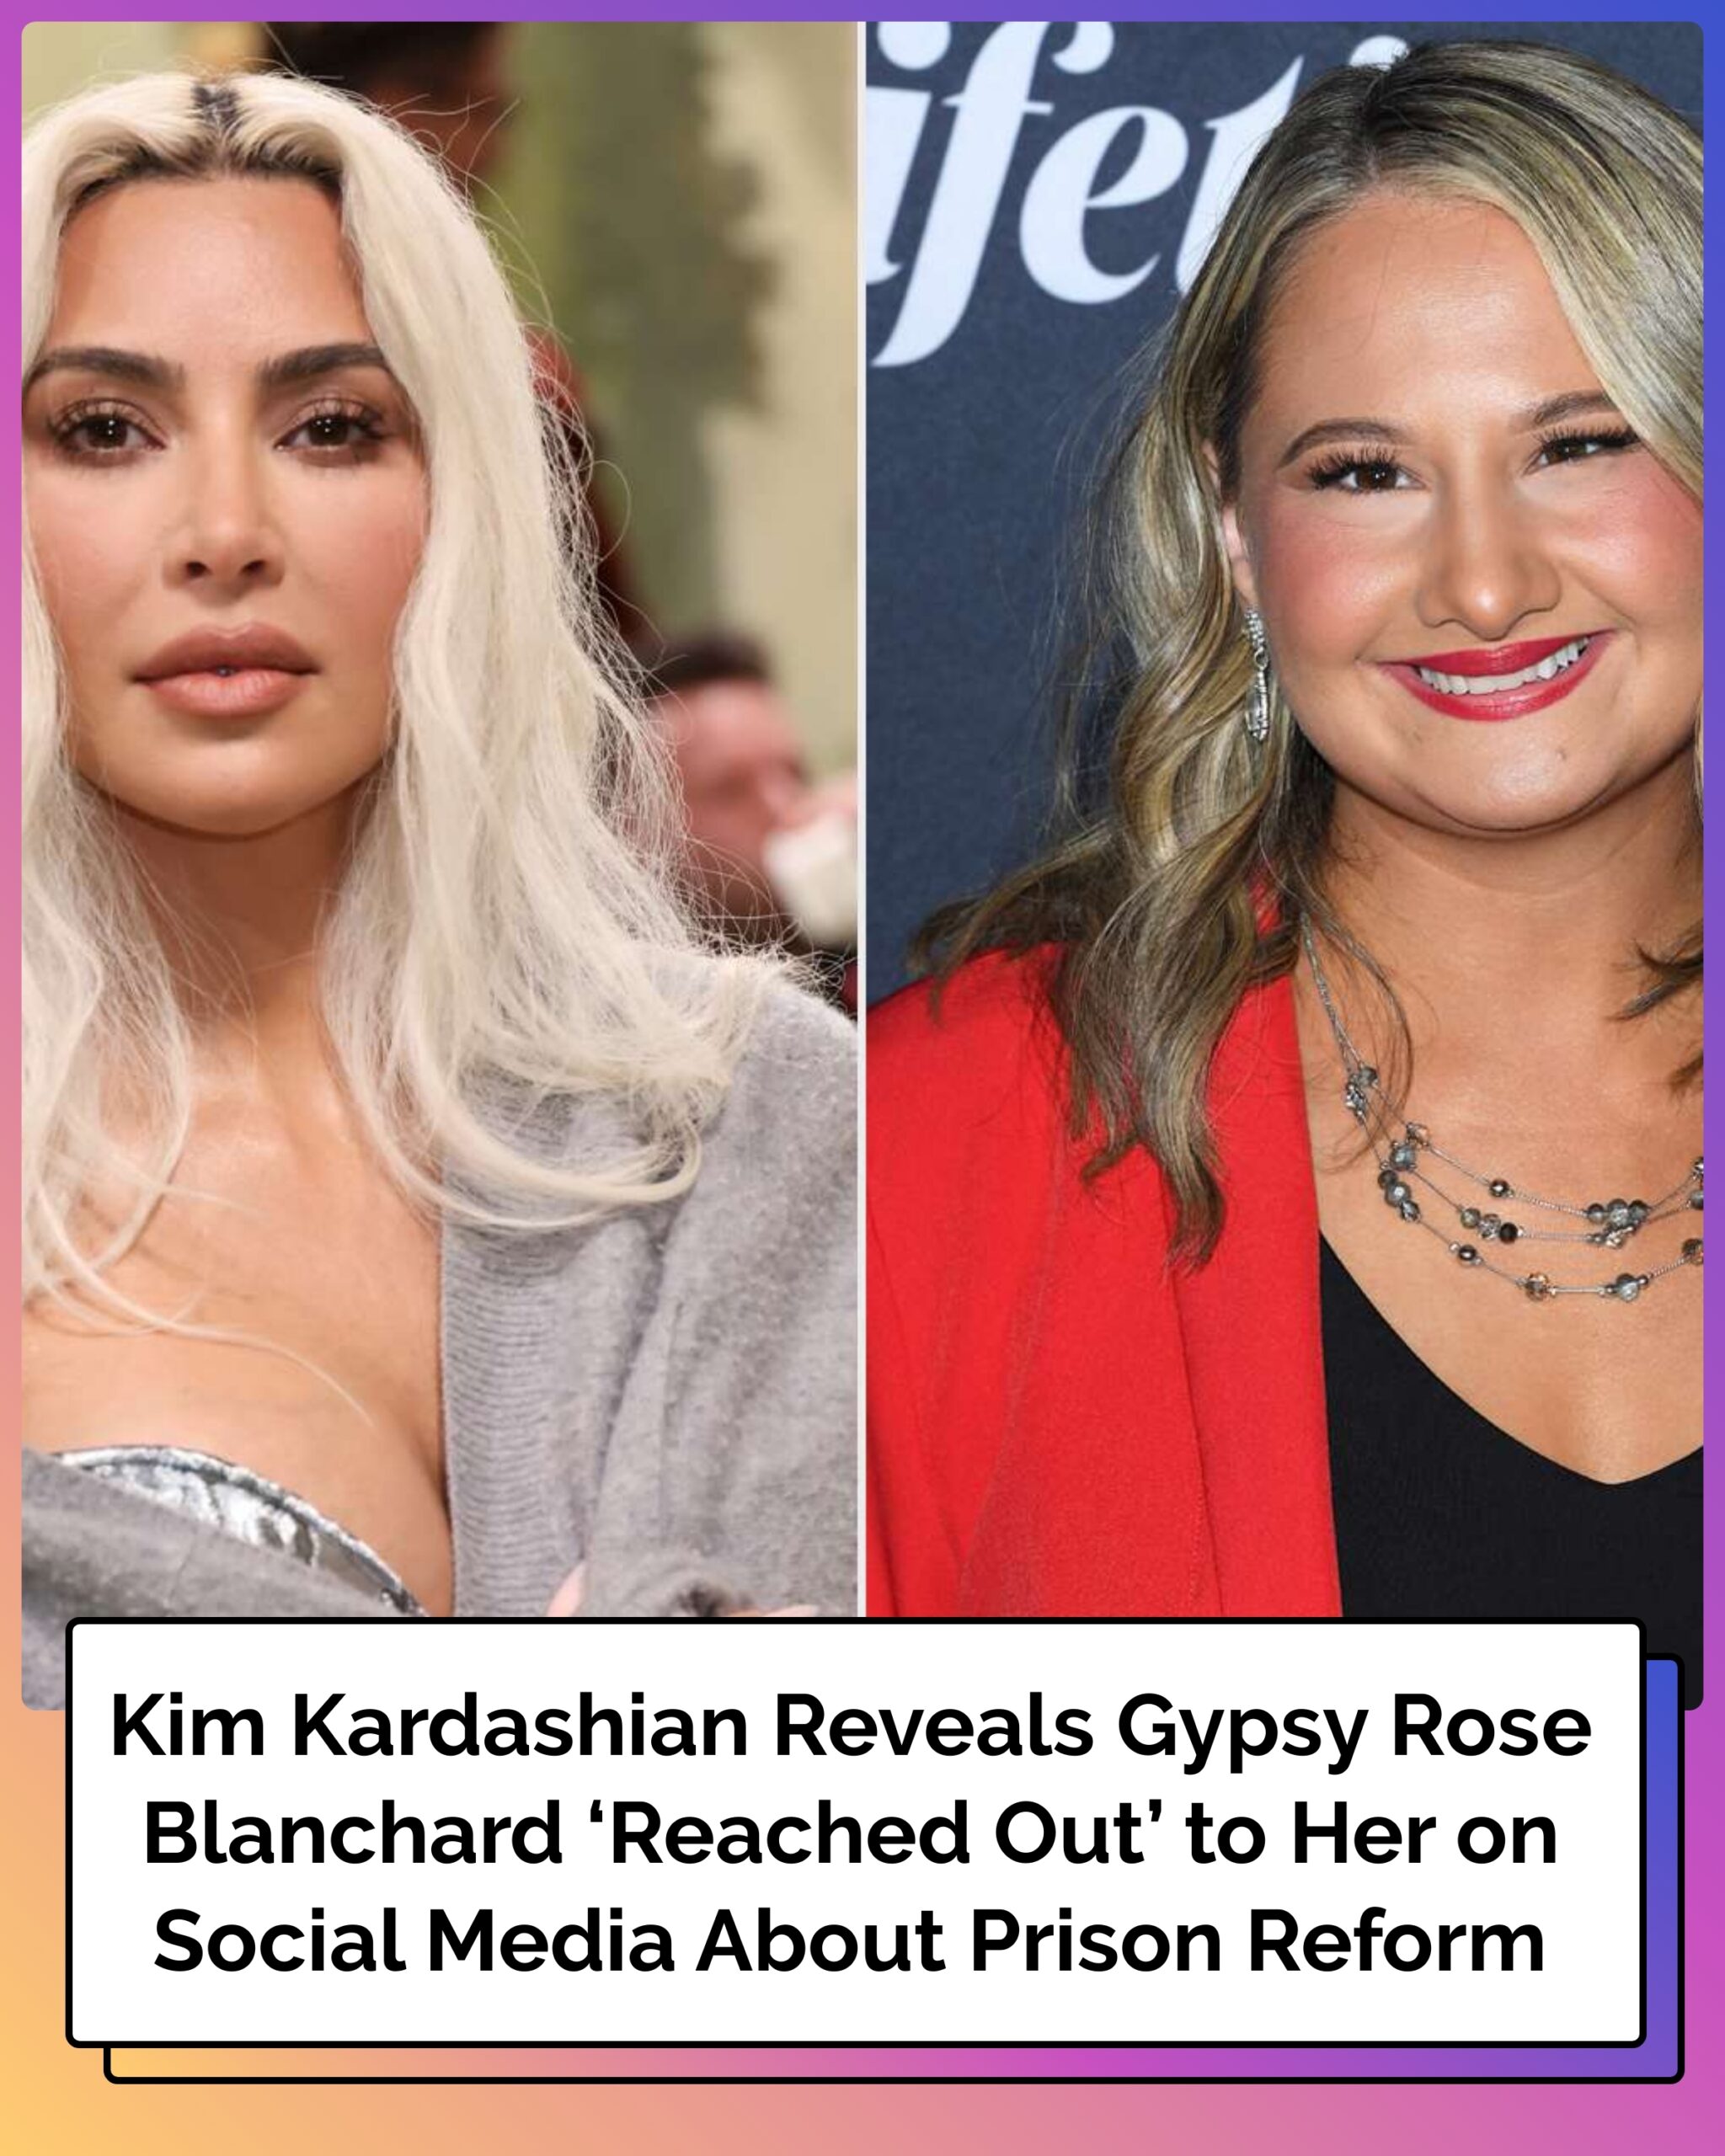 Kim Kardashian Reveals Gypsy Rose Blanchard ‘Reached Out’ to Her on Social Media About Prison Reform